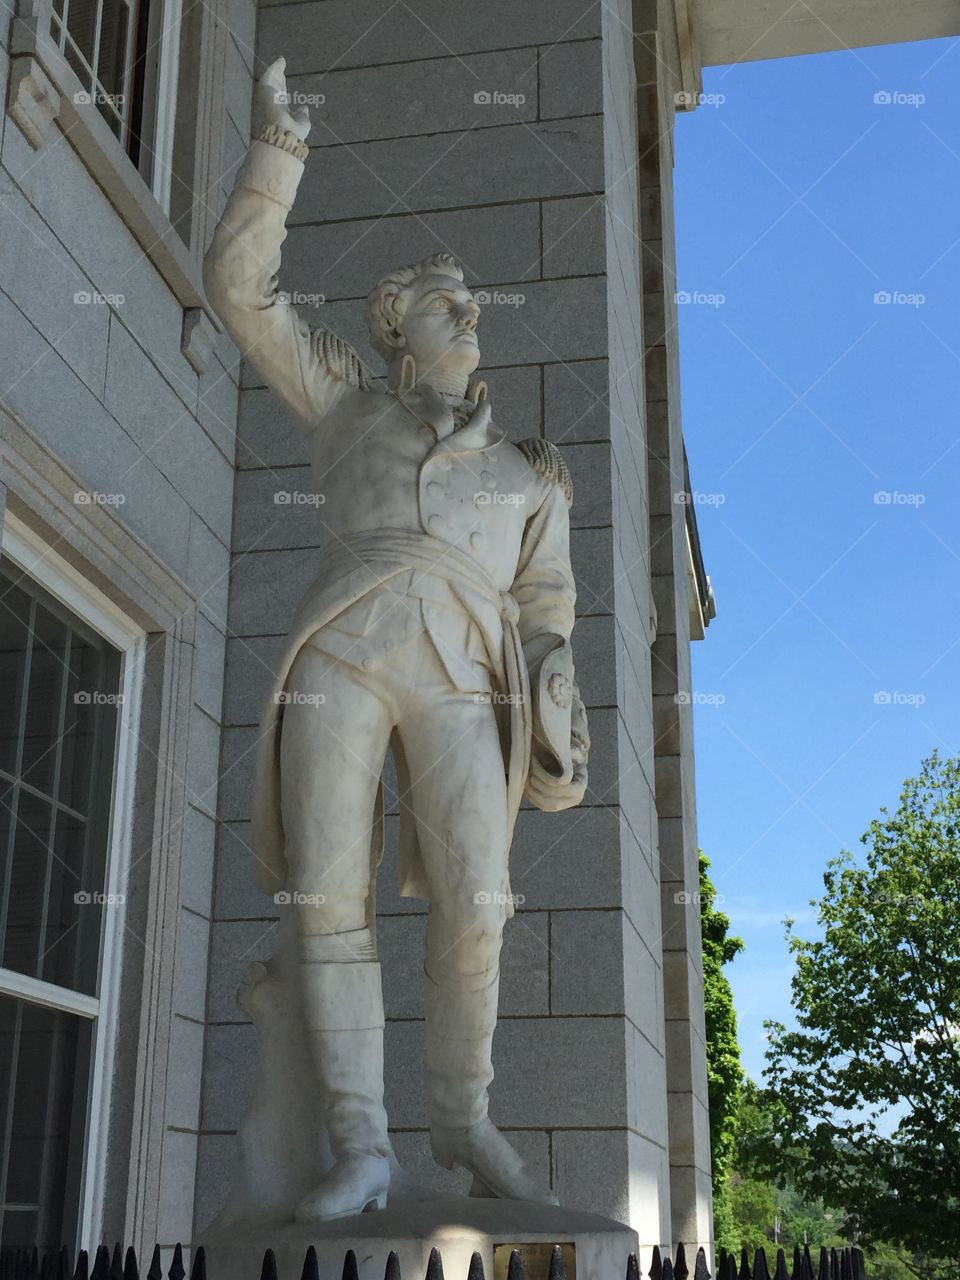 Ethan. Statue of Ethan Allen at the Vermont State House